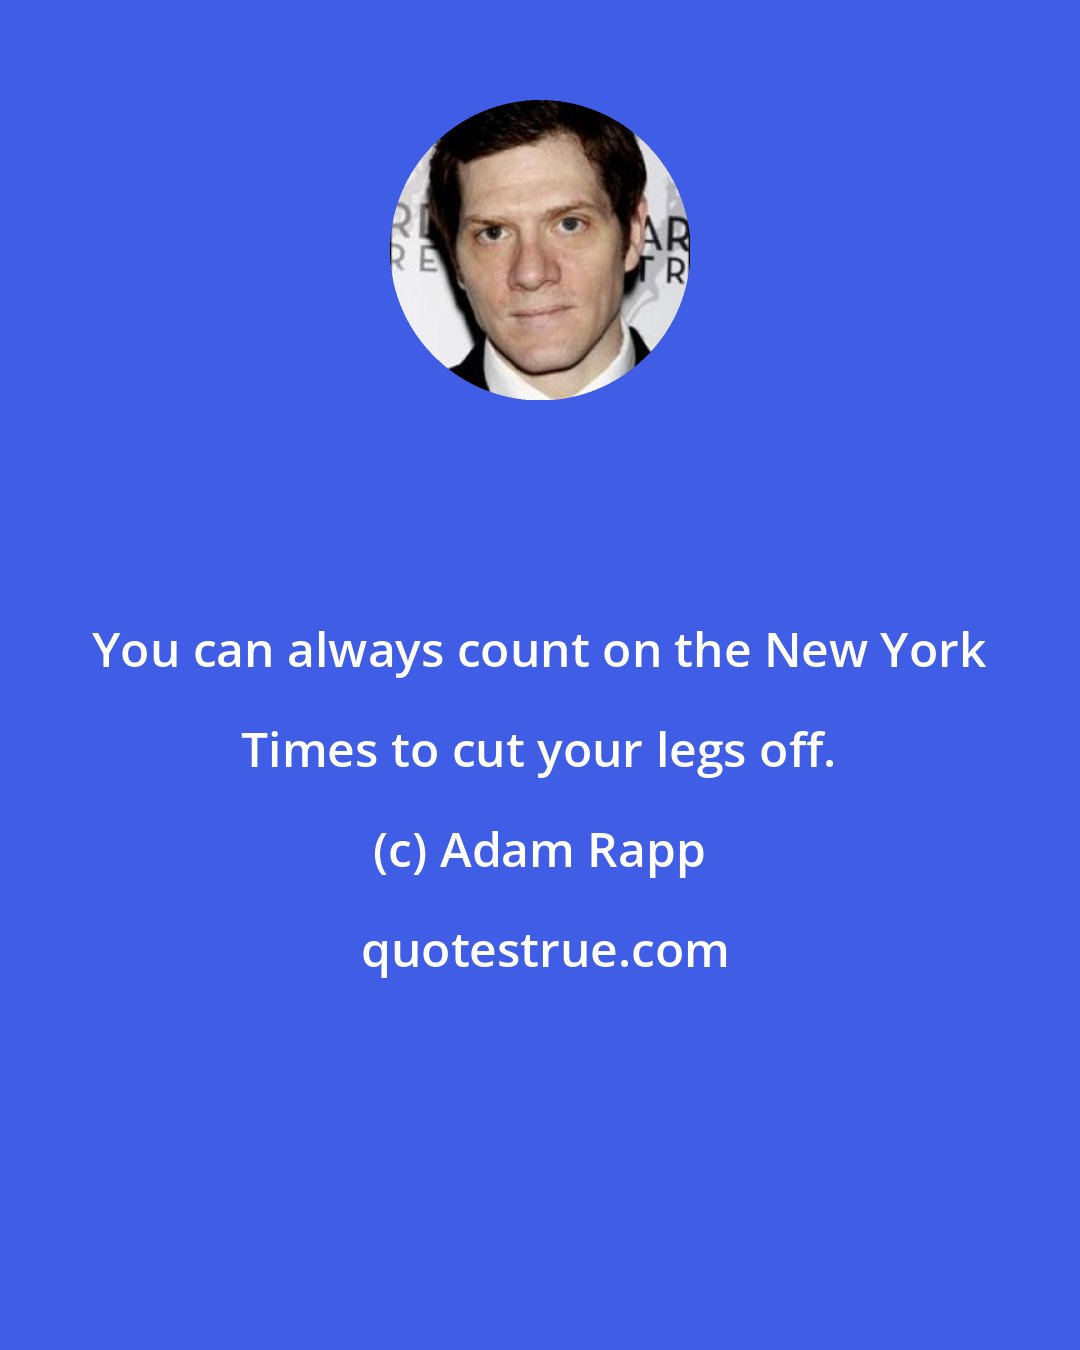 Adam Rapp: You can always count on the New York Times to cut your legs off.